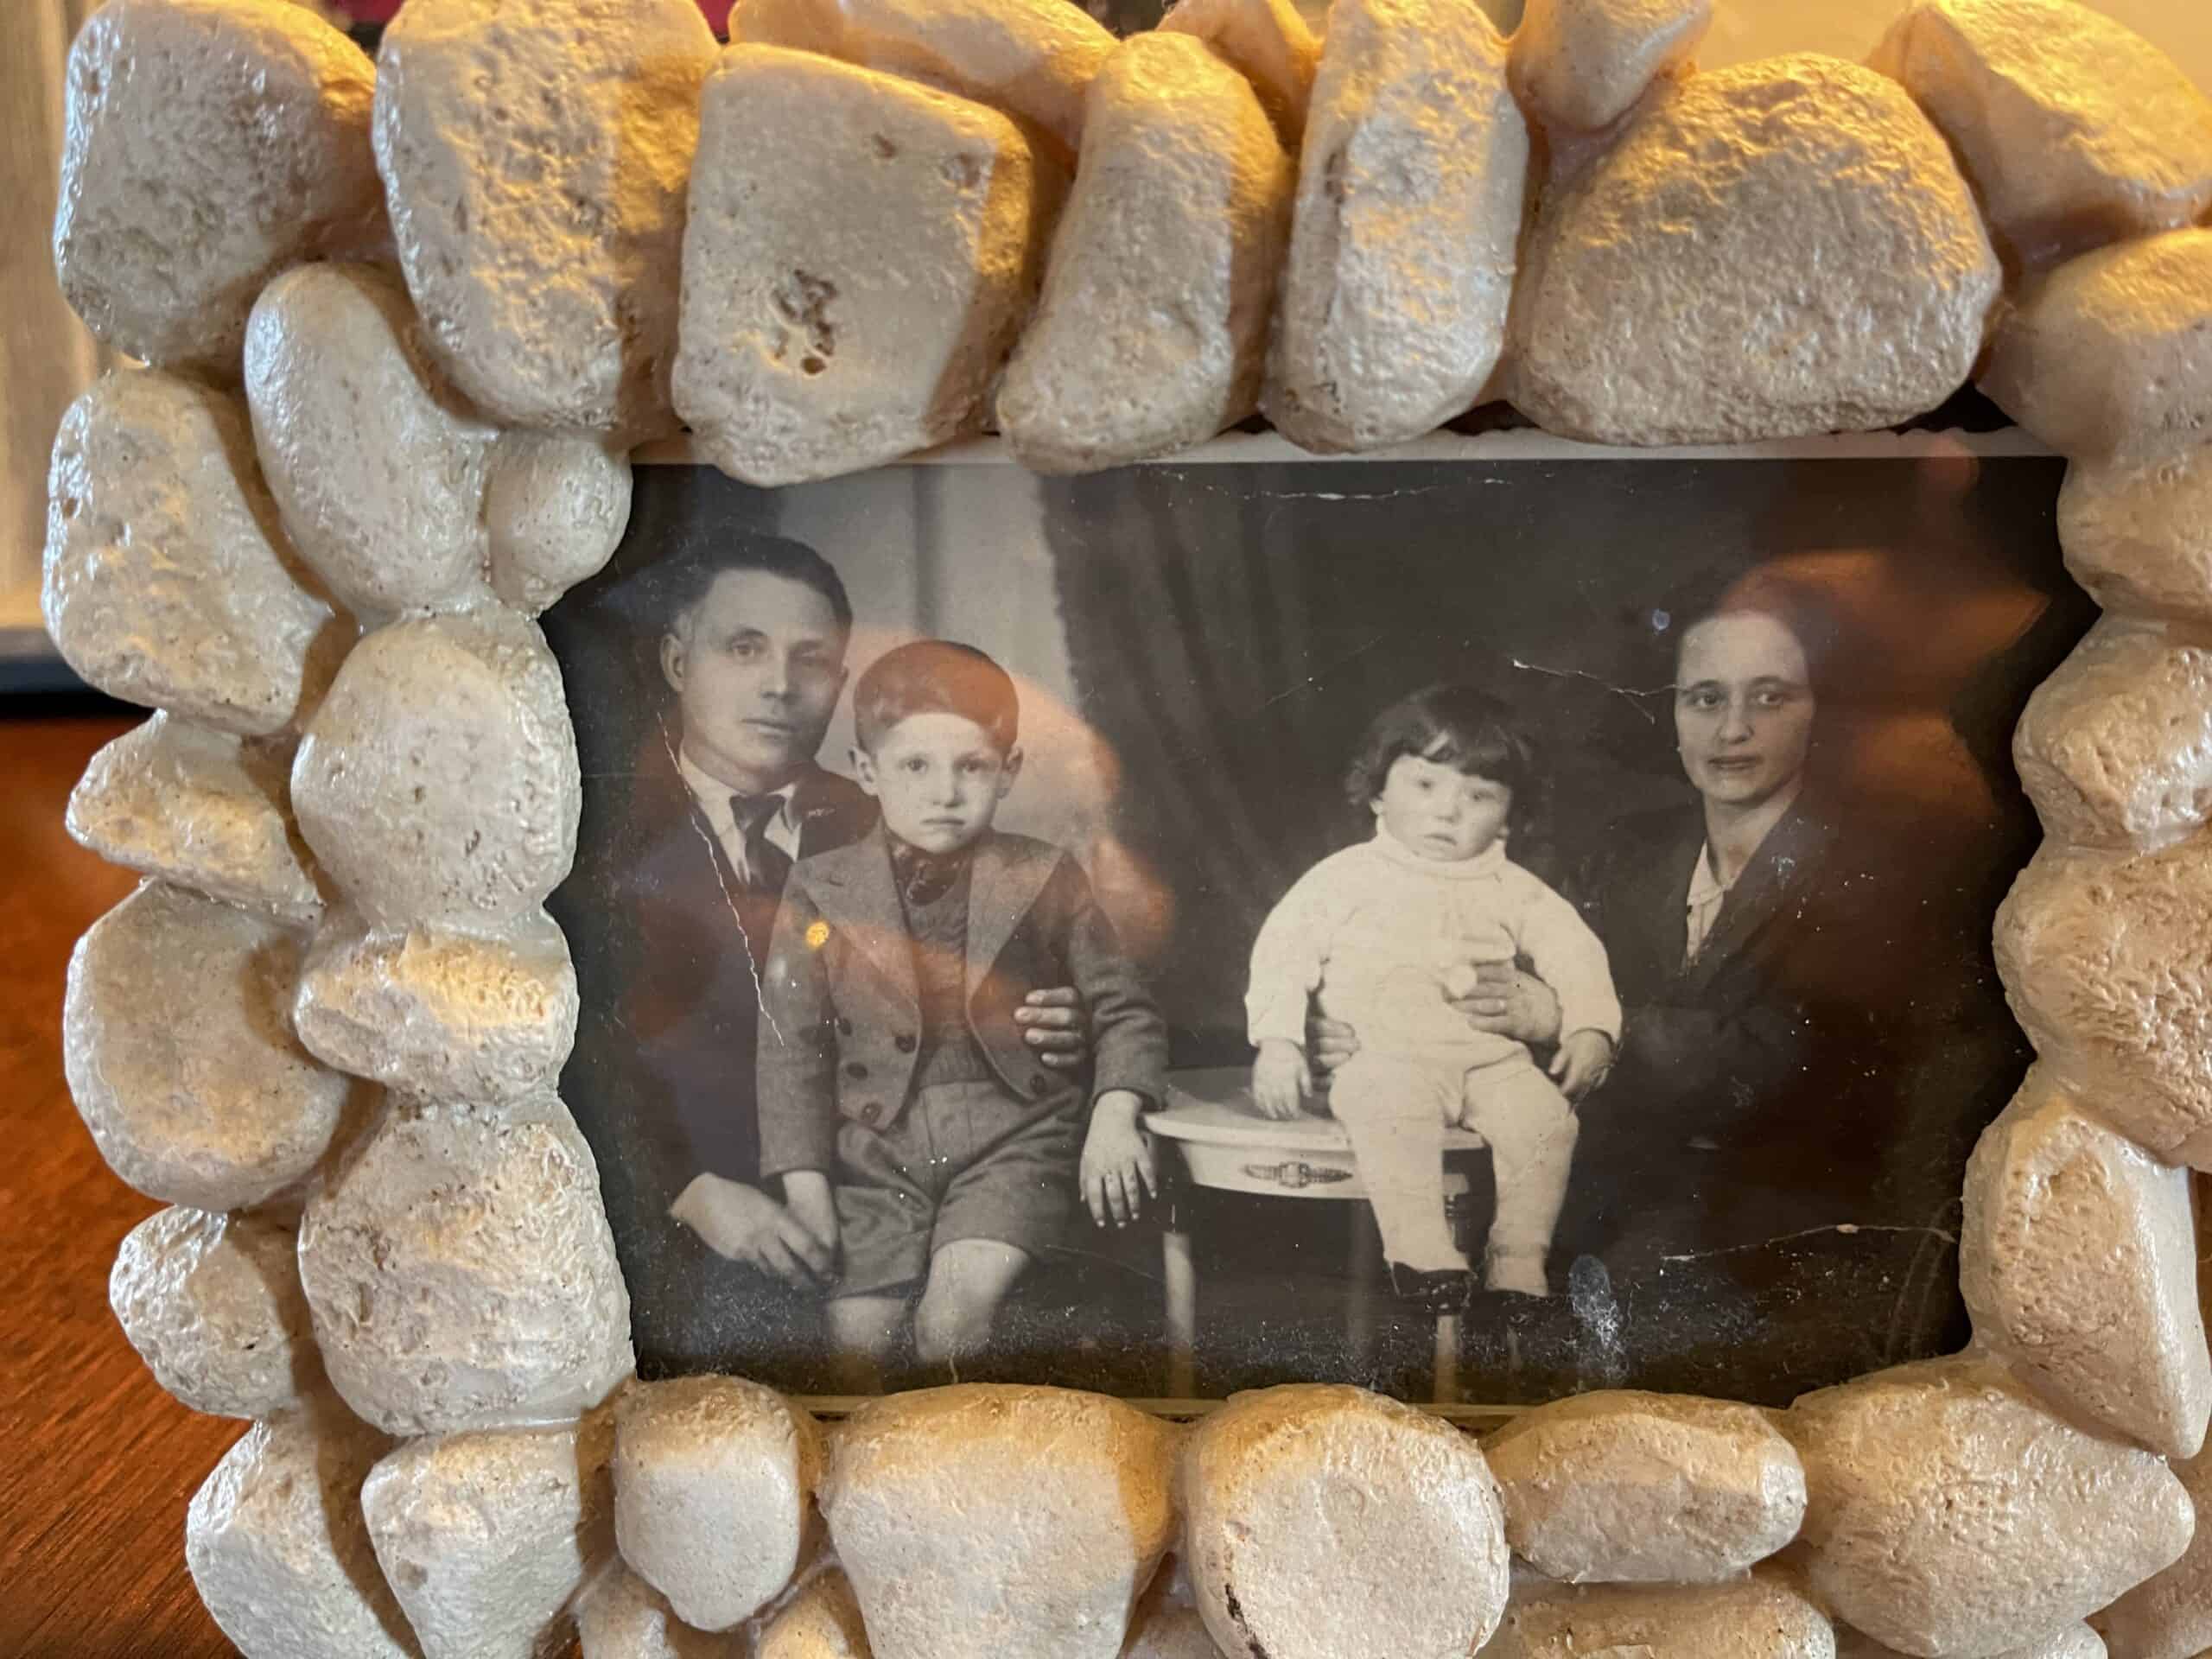 Dario Lenarduzzi's father, Mario Lenarduzzi, is pictured as a child along with his father and mother, Benedetto and Emilia Lenarduzzi, and his brother, Luigi.